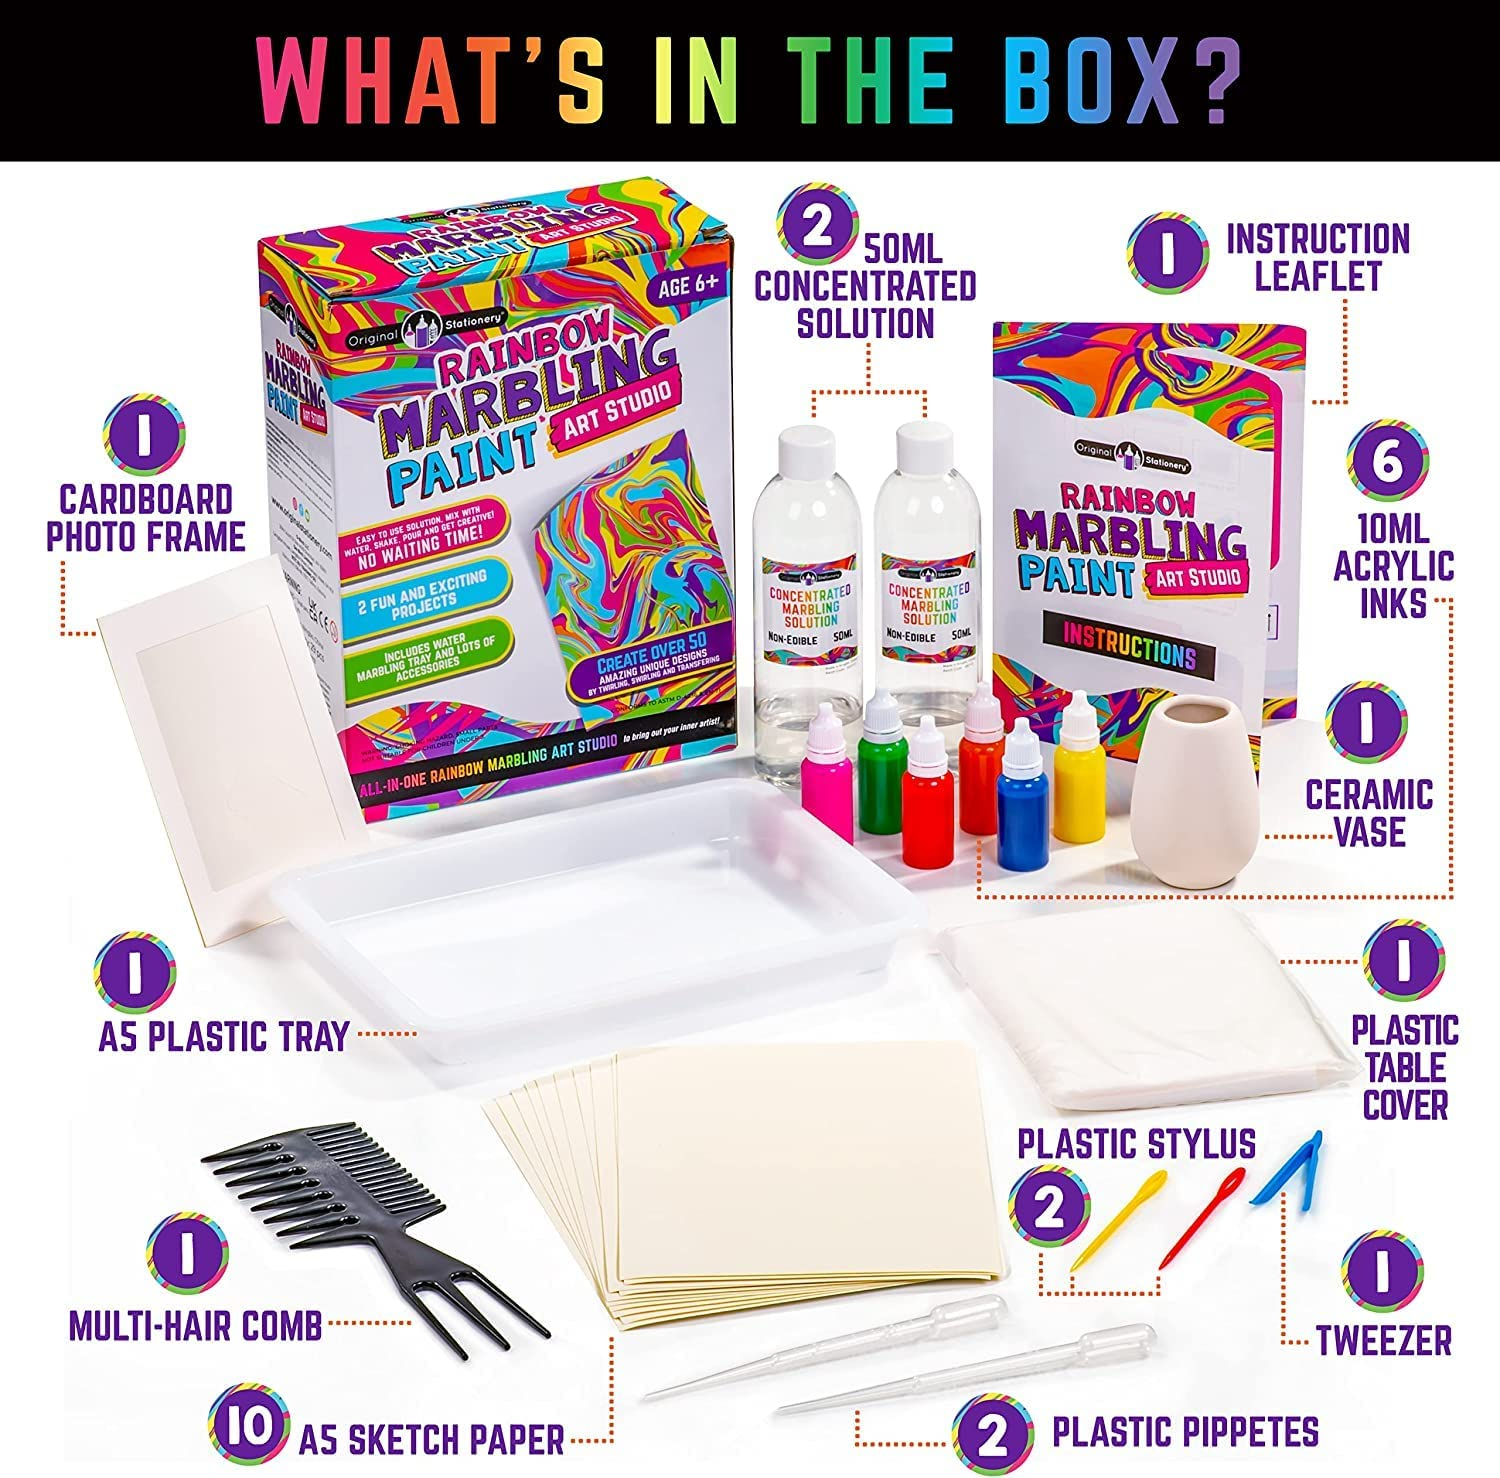 Original Stationery Rainbow Marbling Kit, Everything You Need in One Marble Painting Kit Kids to Make Marble Art and Craft Kids Will Love, Great Arts and Crafts for Girls and Rainbow Gifts for Girls